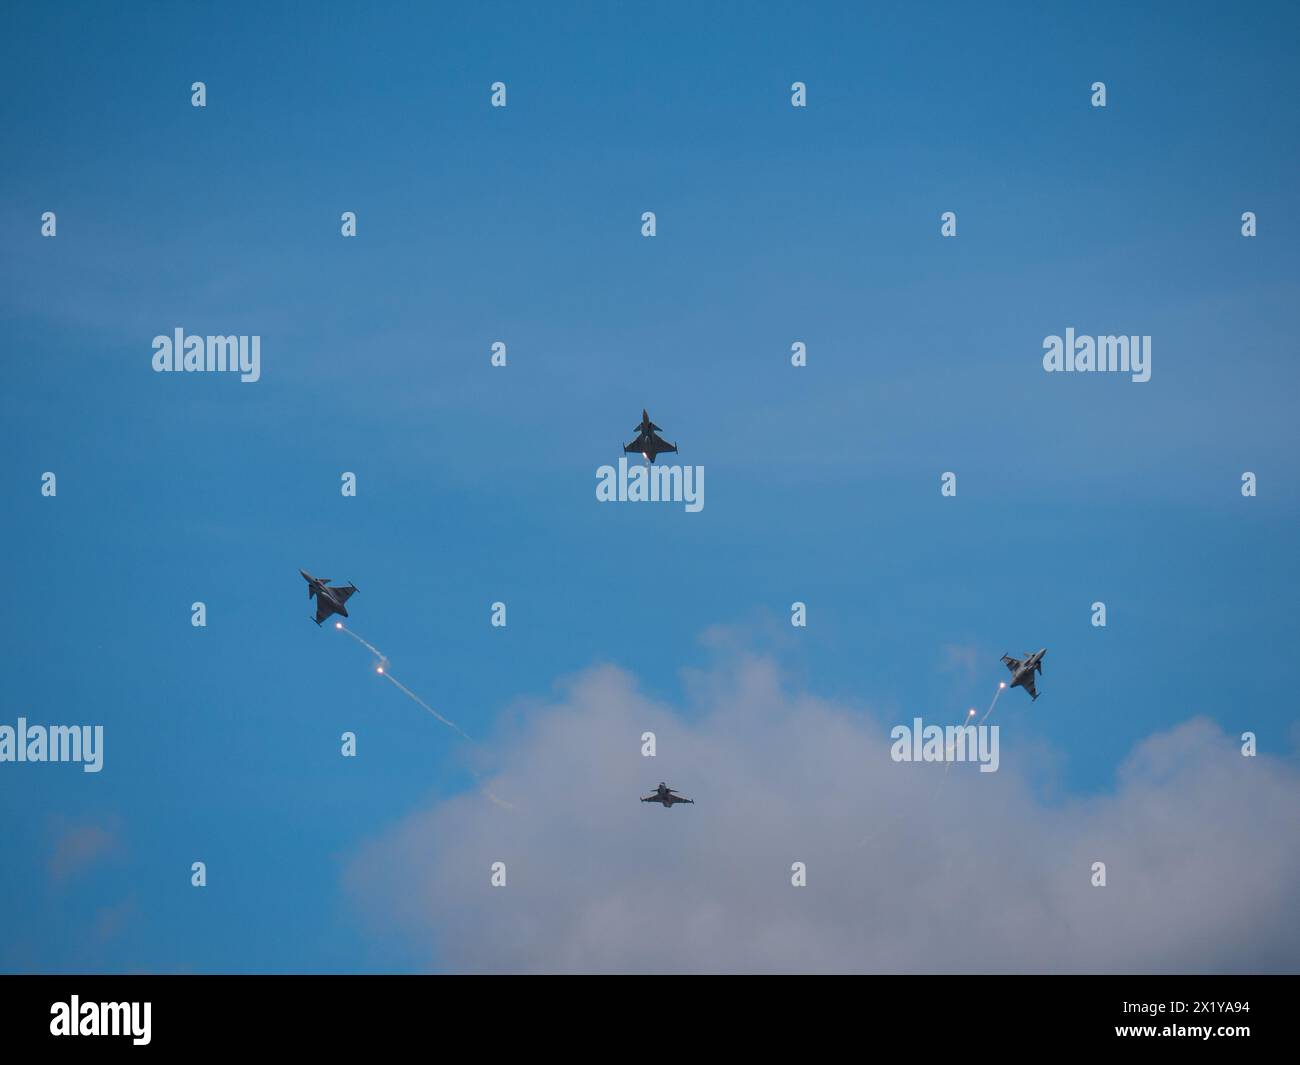 Swedish Airforce air show on F16 Ärna airfield, Uppsala Sweden. Four Swedish fighter jets JAS 39 Gripen flying in close and perfect combat formation. Stock Photo